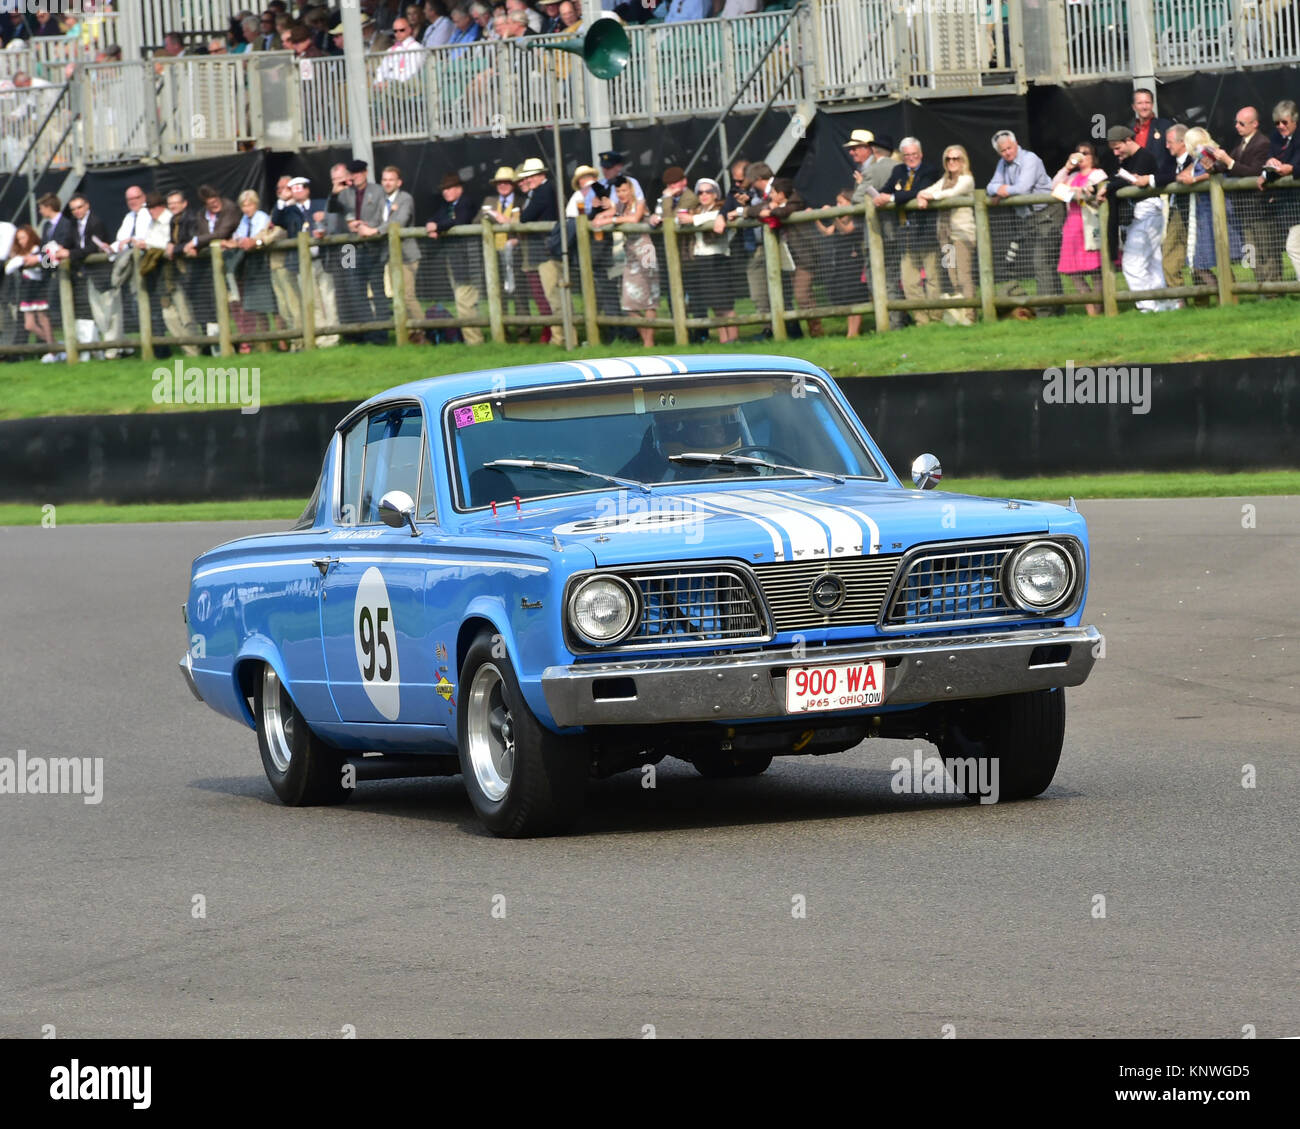 Duncan Pittaway, Tim Dutton, Plymouth Barracuda, 900 WA, Shelby Cup, Goodwood Revival 2014, 2014, automobile, Autosport, Goodwood Revival, Goodwood Re Stock Photo